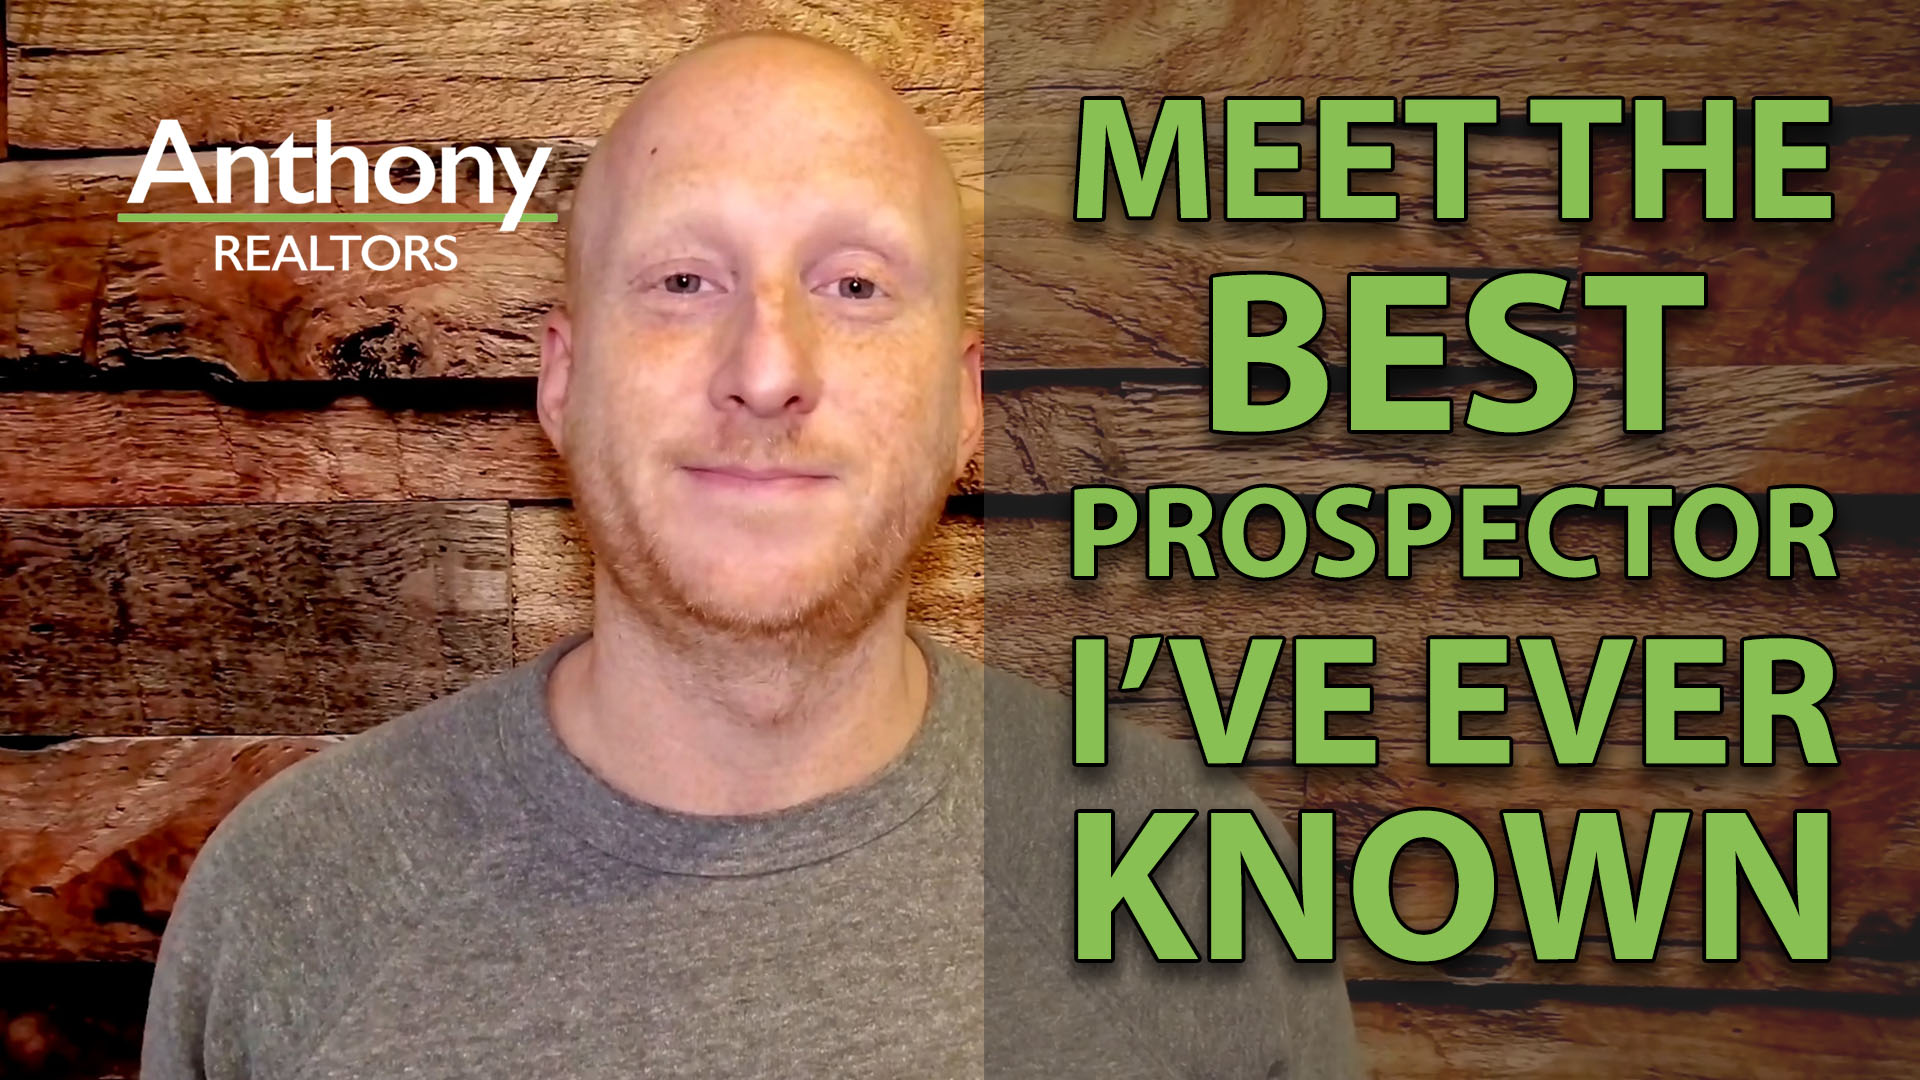 The Ultimate Prospector—Not Who You Might Think